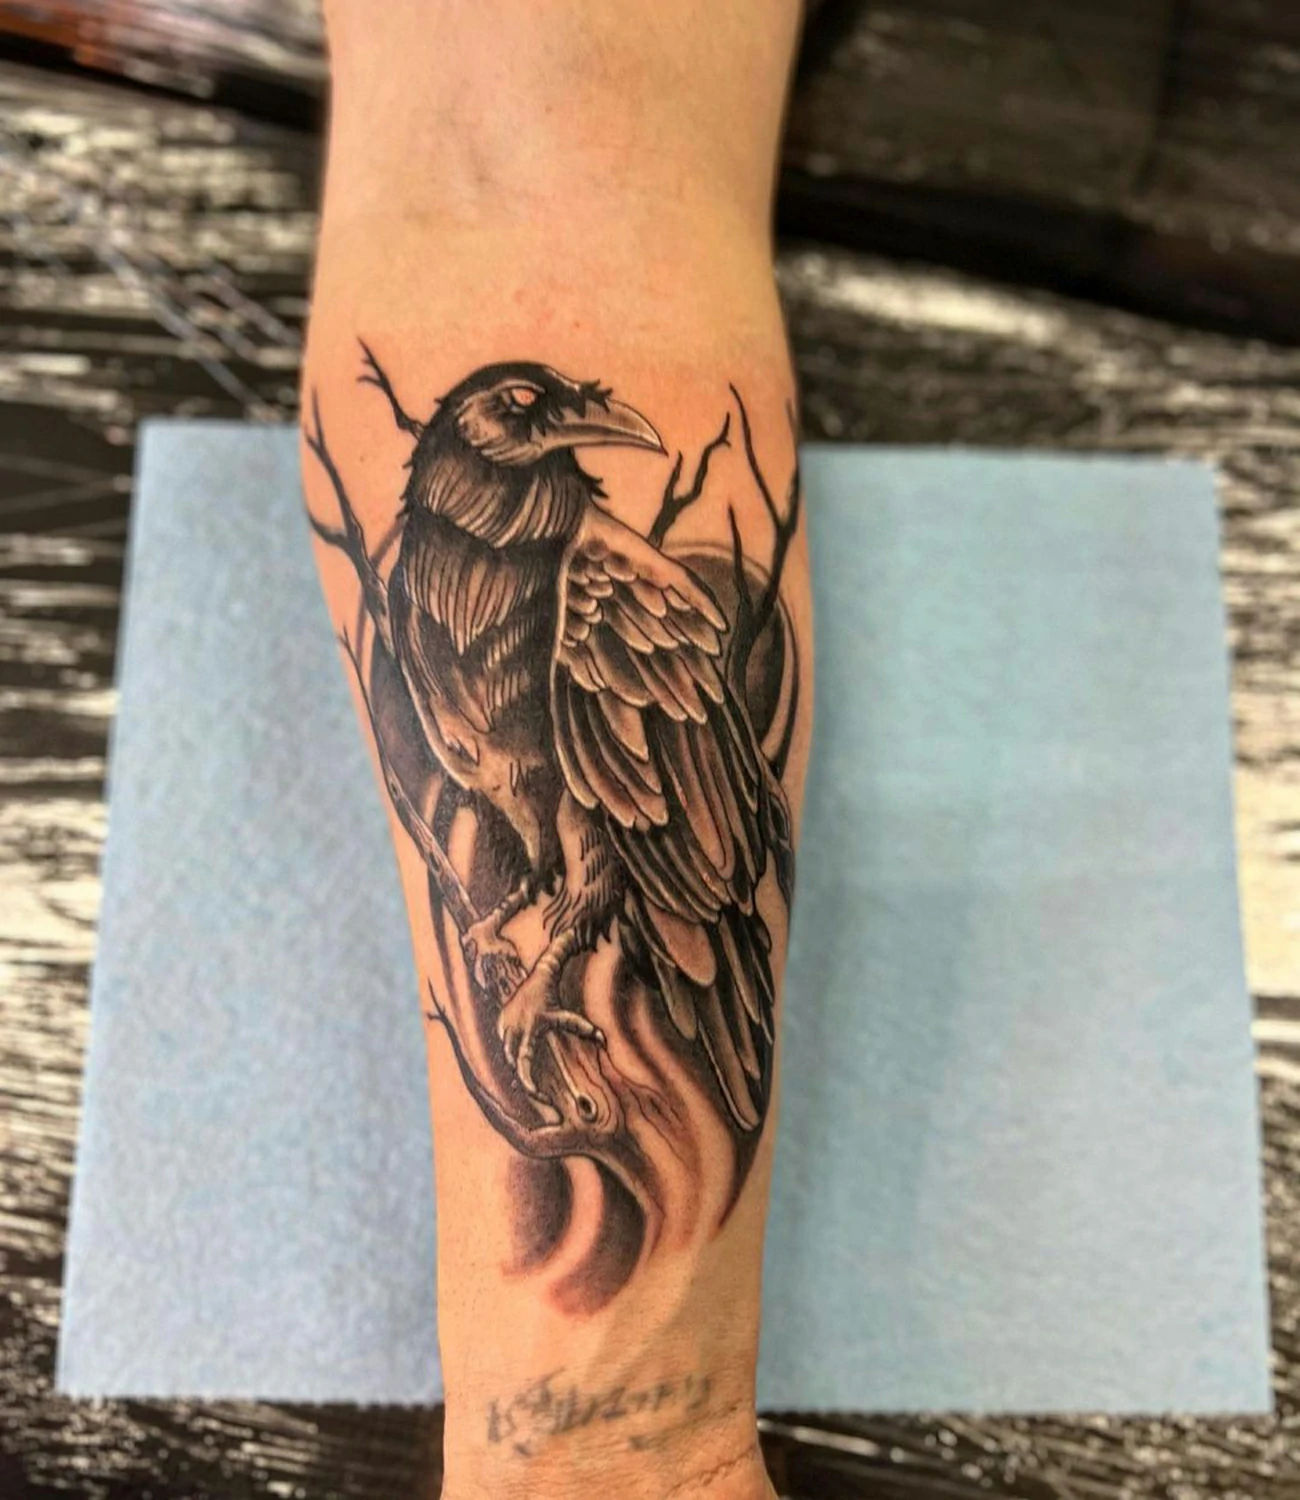 Norse raven tattoos: Tattoos featuring ravens inspired by Norse mythology and art.